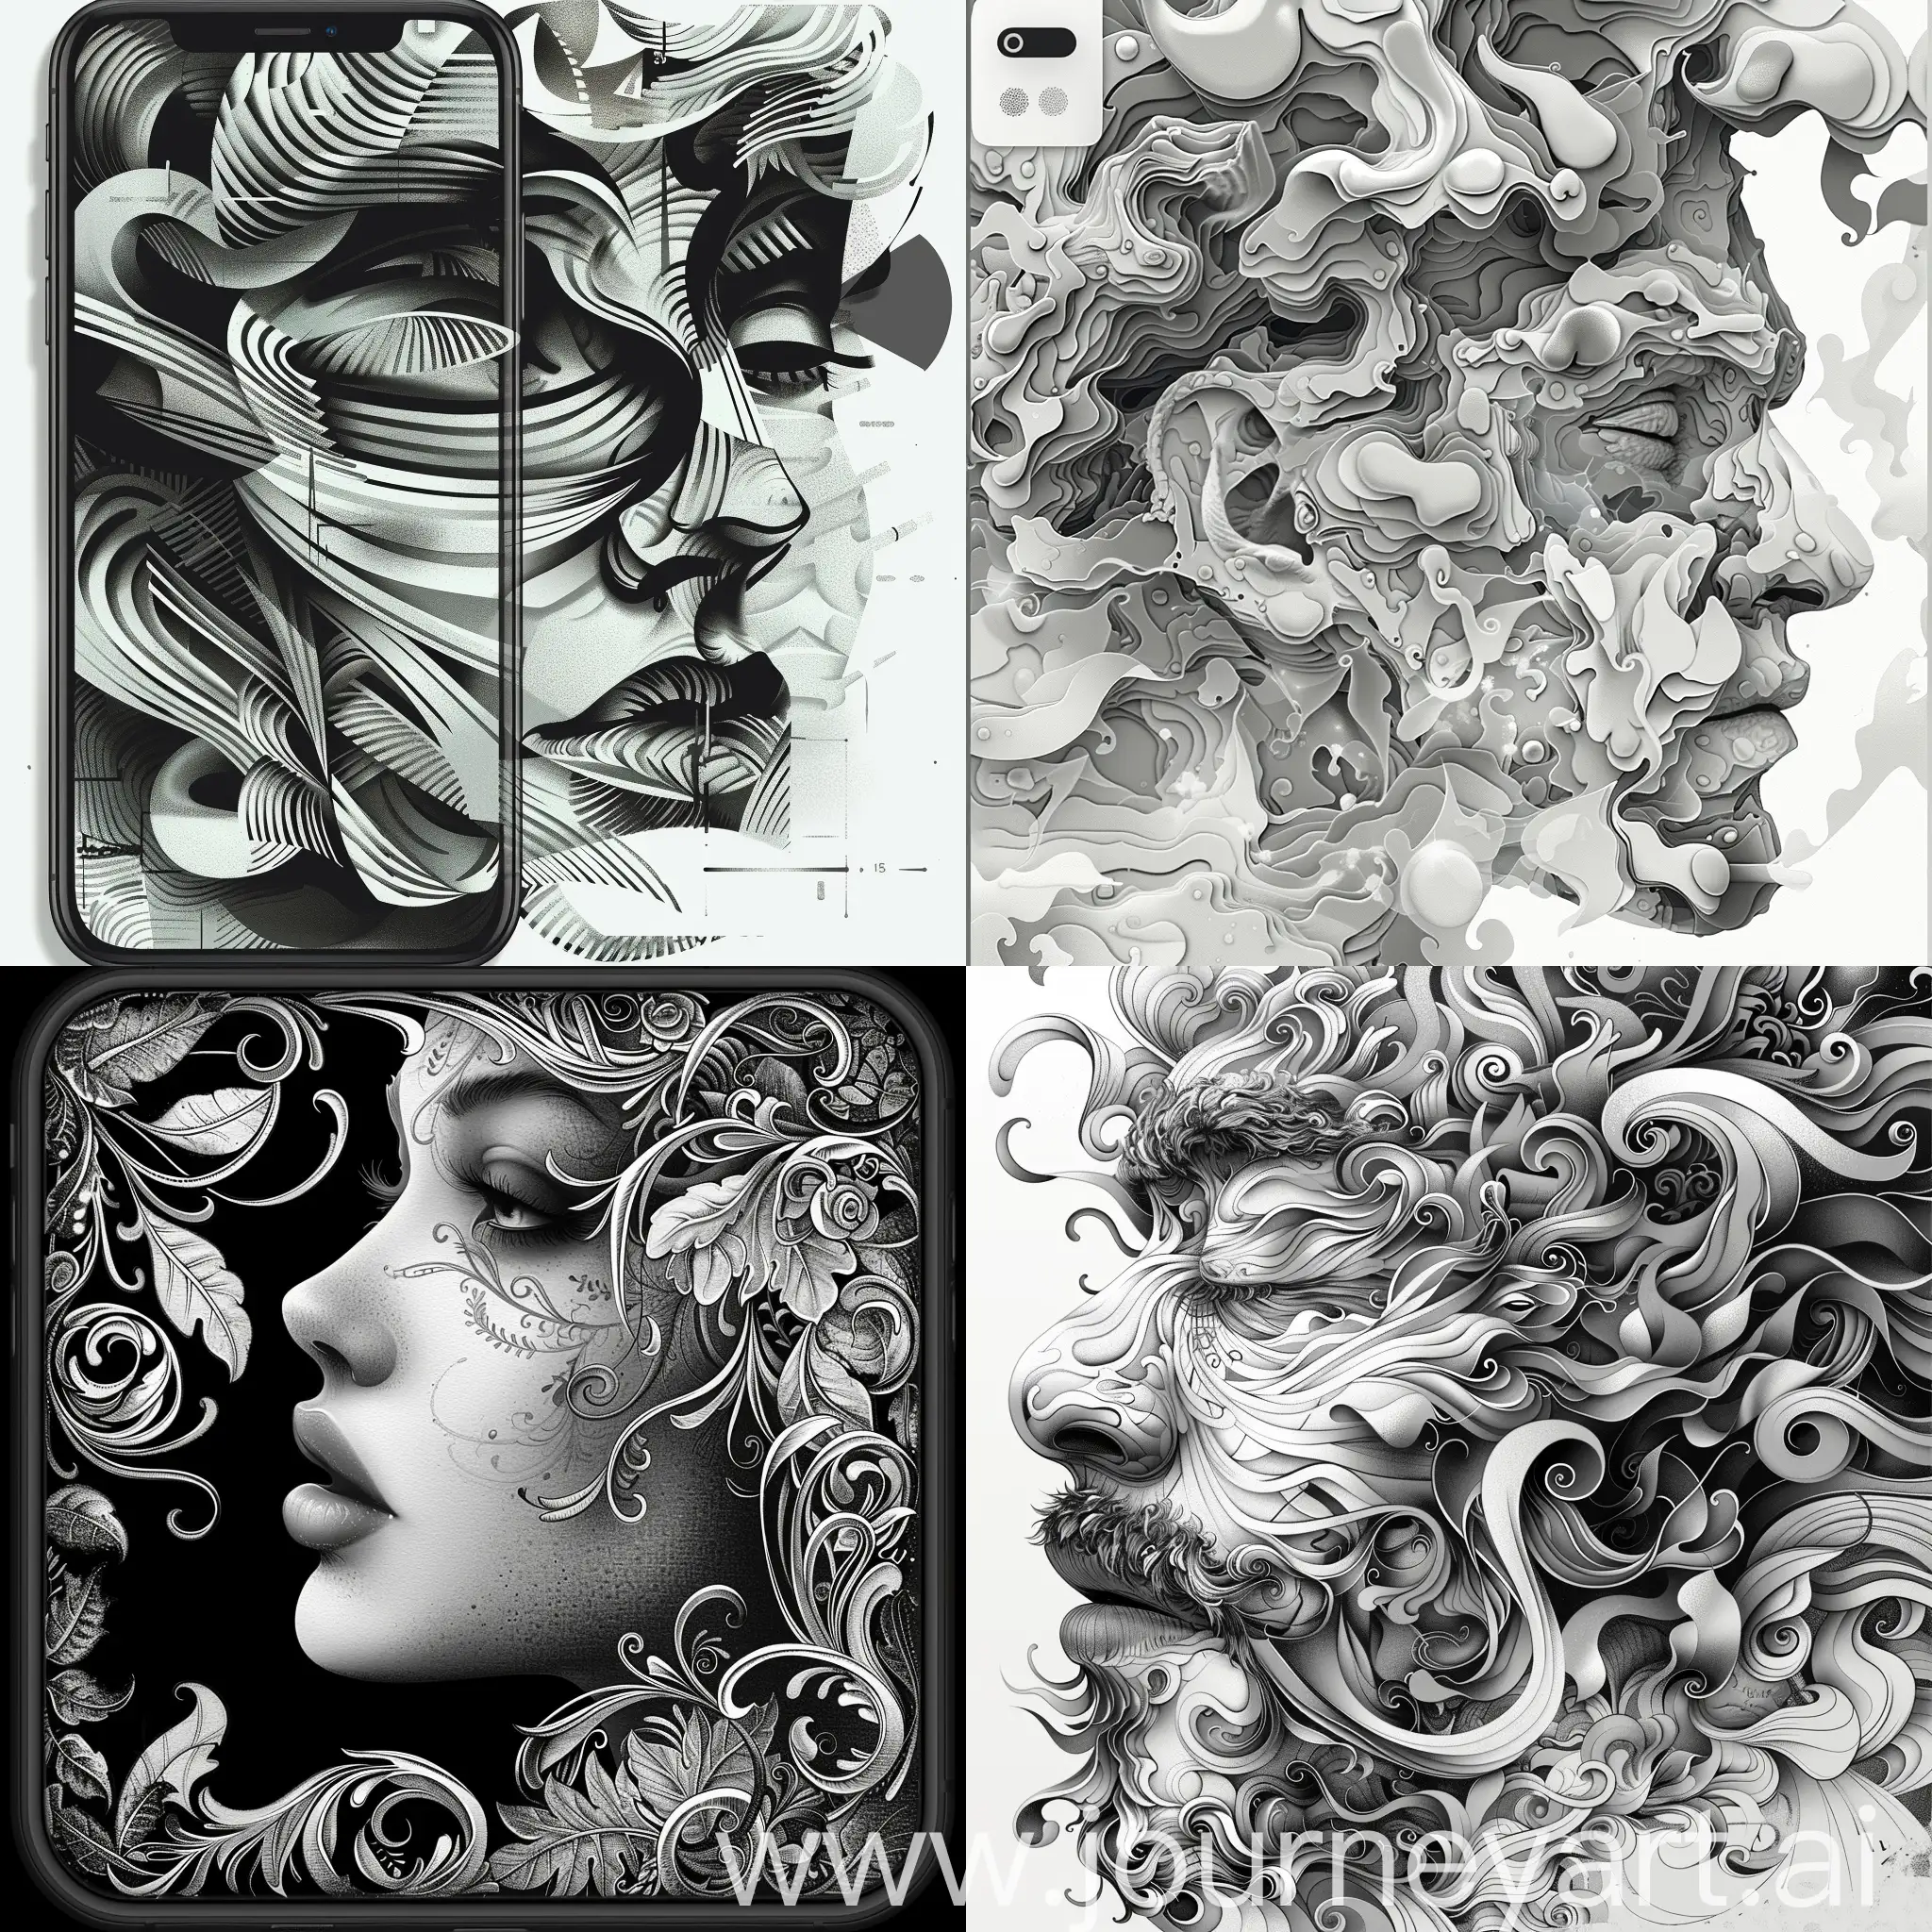 Create digital drawings on an iPhone using the artistic styles of Duffy Sheridan, J. Scott Campbell, monochromatic serenity, hyper-detailed illustrations, wavy compositions, Martin Rak, and a grayscale color palette. Apply the following parameters: aspect ratio 101:128, size 750 pixels, and use a brush size of 5.